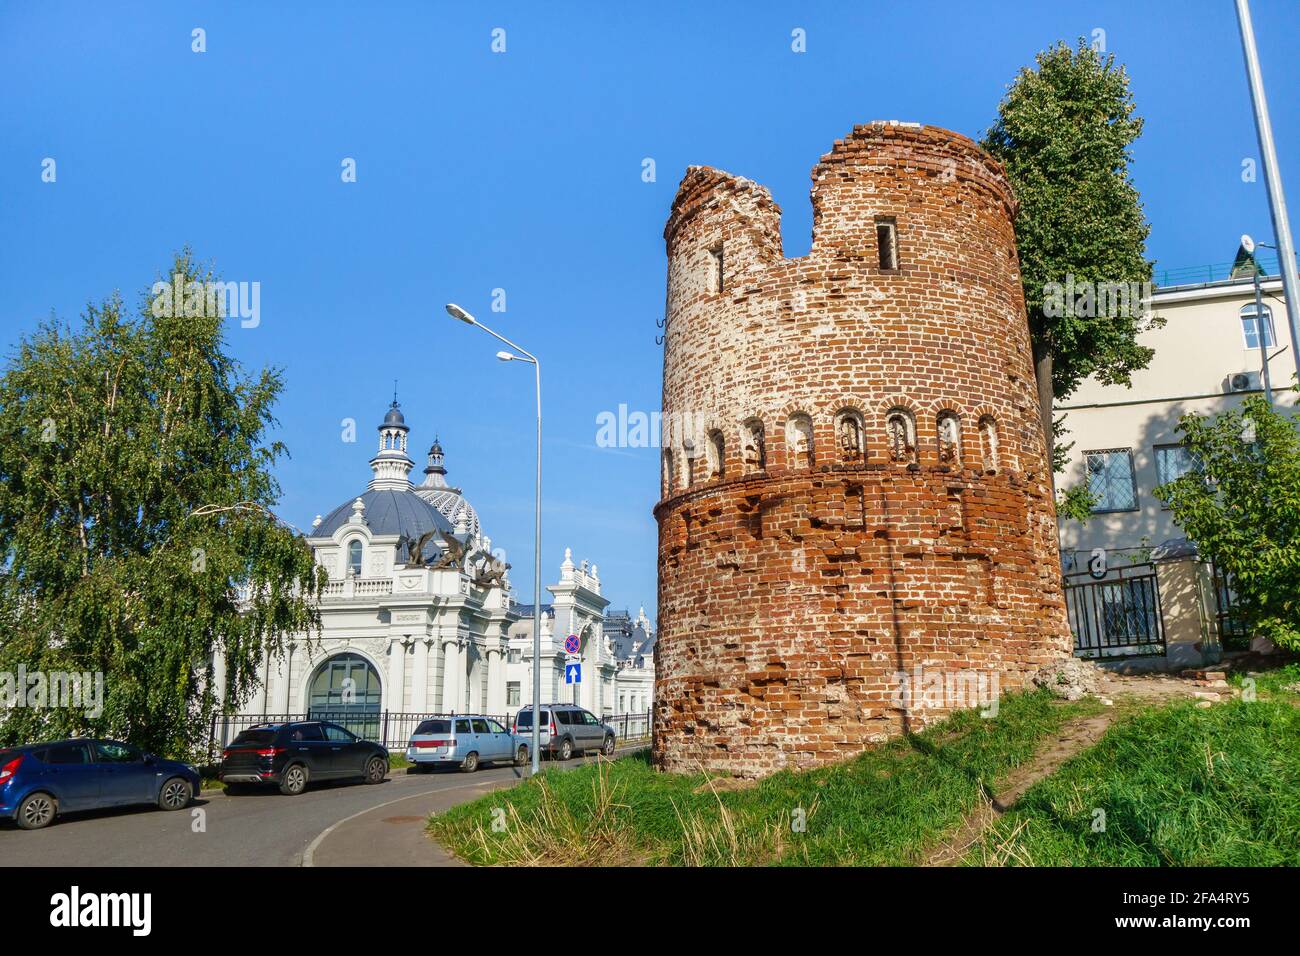 Ancient watchtower, remote building of Kazan Kremlin complex. Building of Farmers' Palace is visible in background. Shot in Kazan, Russia Stock Photo